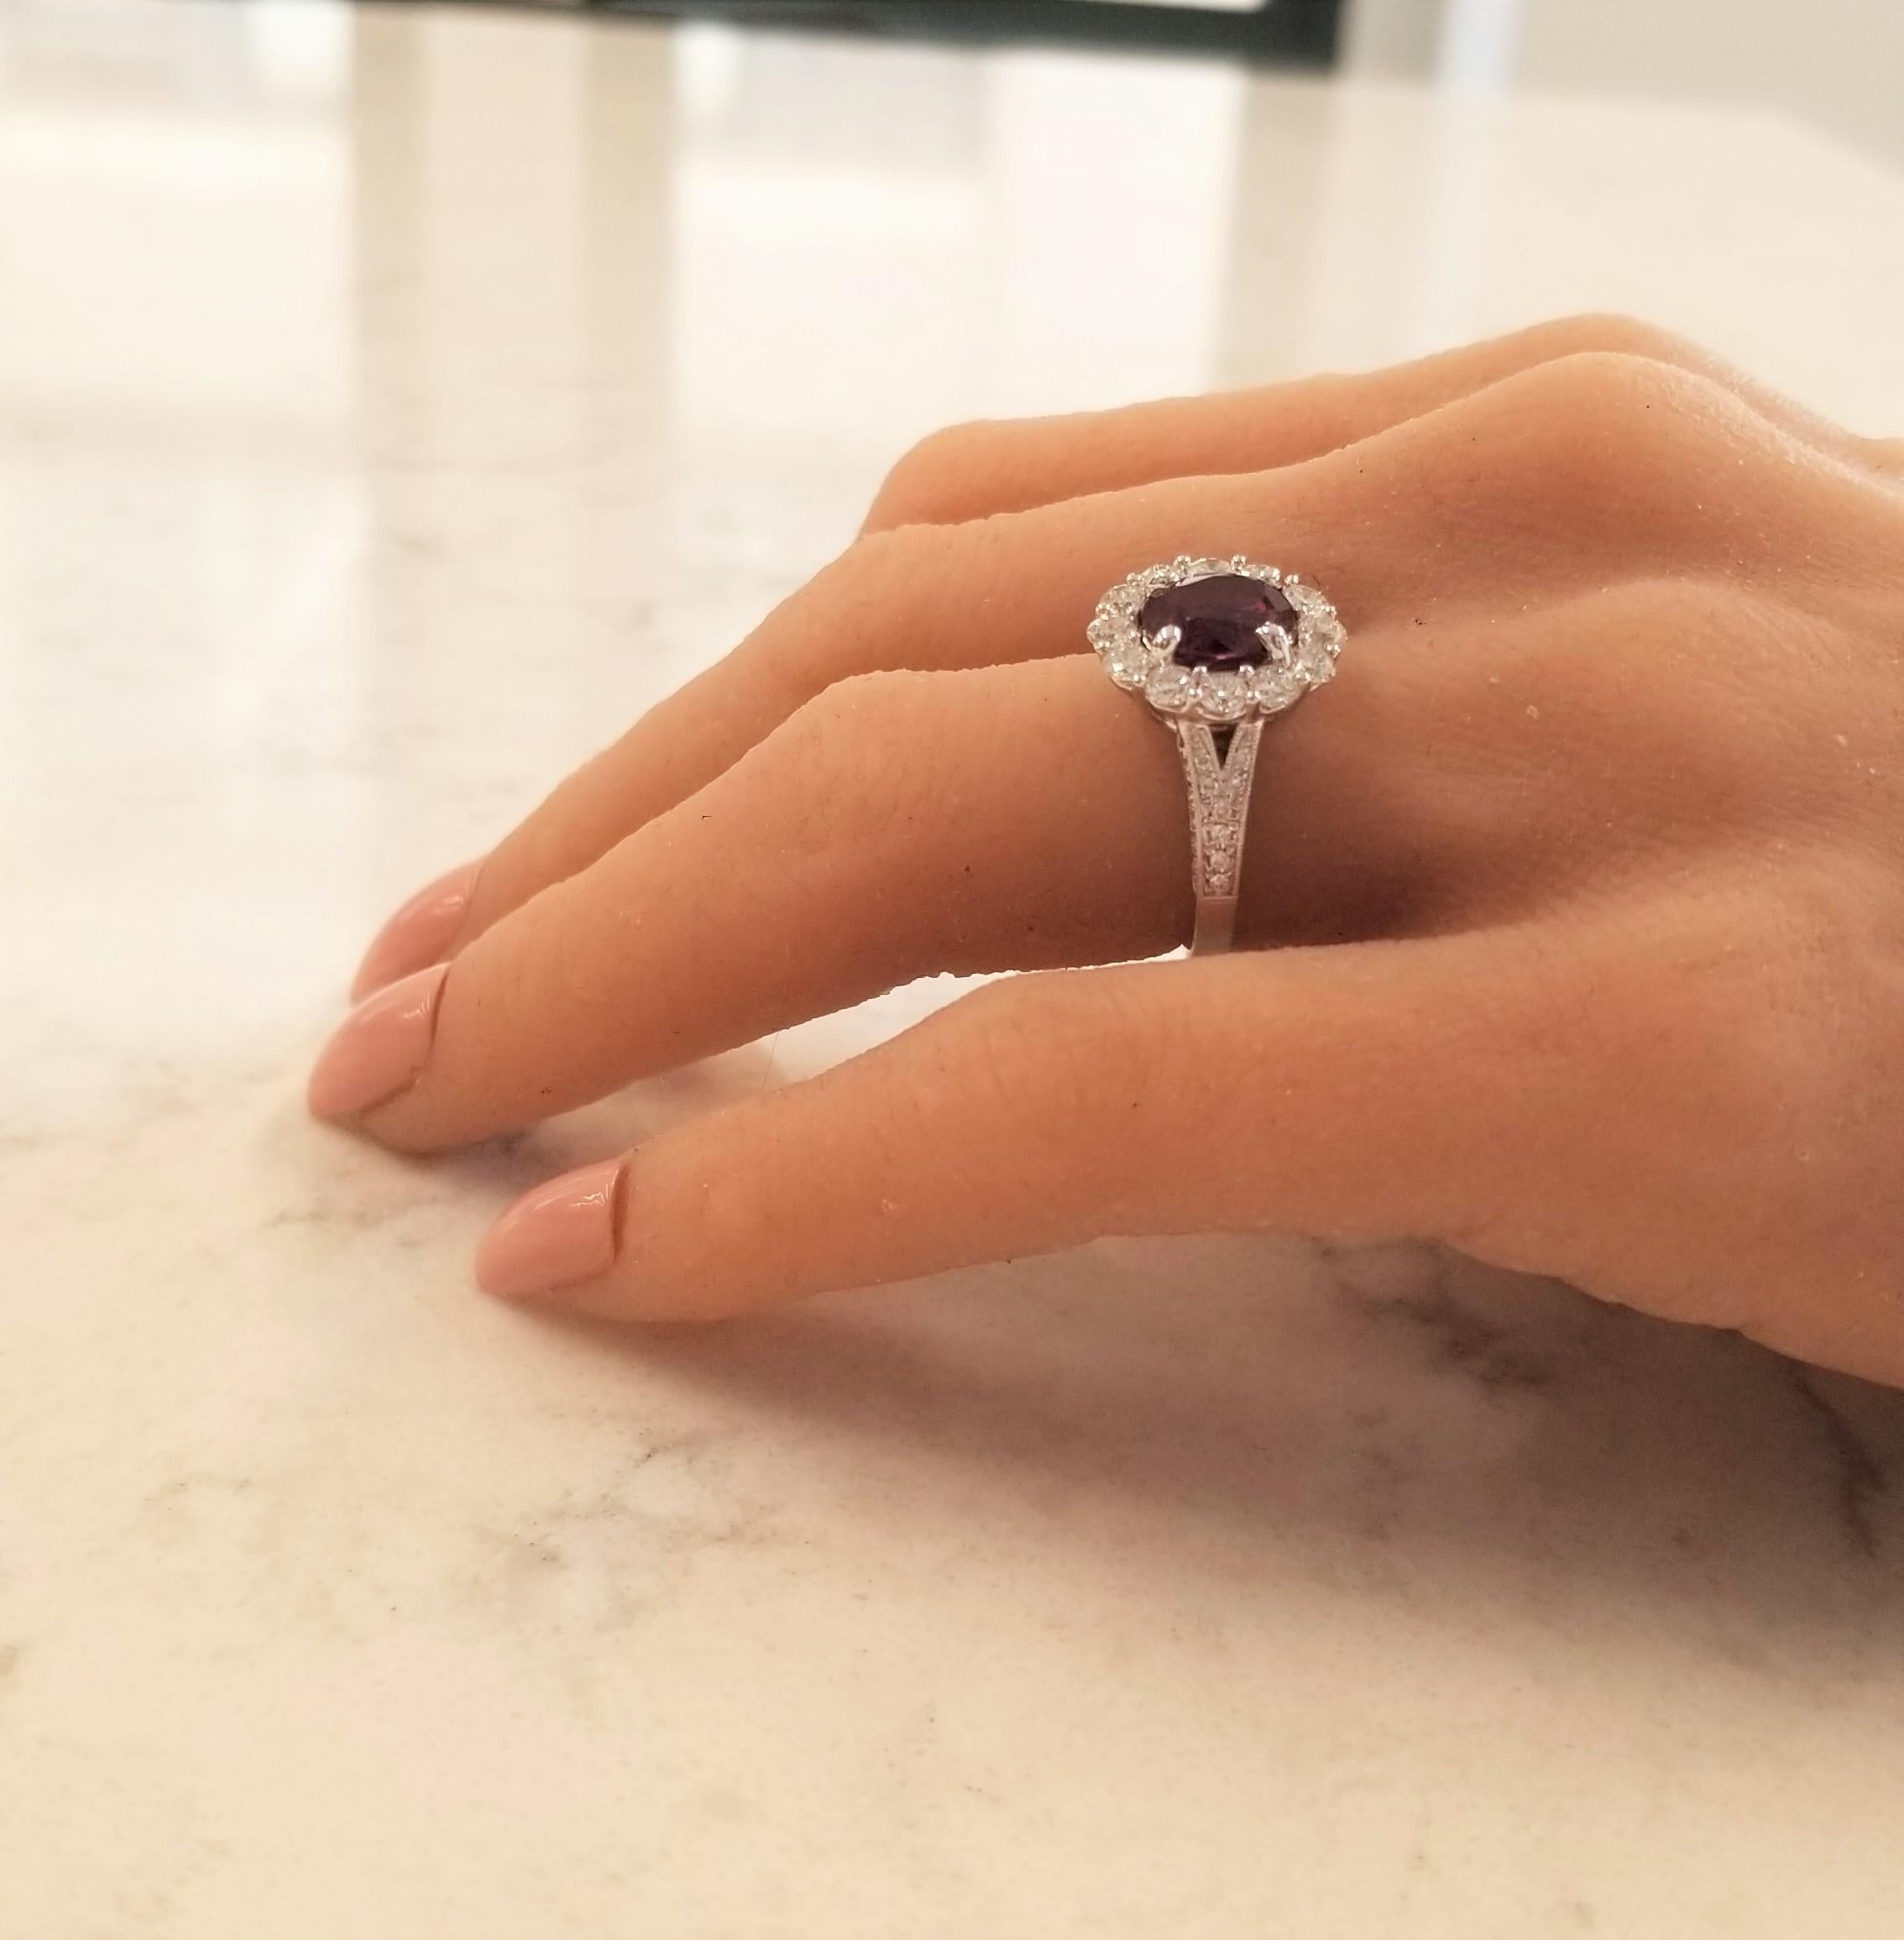 This sapphire ring isn't just as unique as it looks, it stands out from all other purples on the spectrum. This gem source is Sri Lanka; the cut is an oval brilliant; the color is unique to a deep vivid purplish-pink with undertones of berry hues